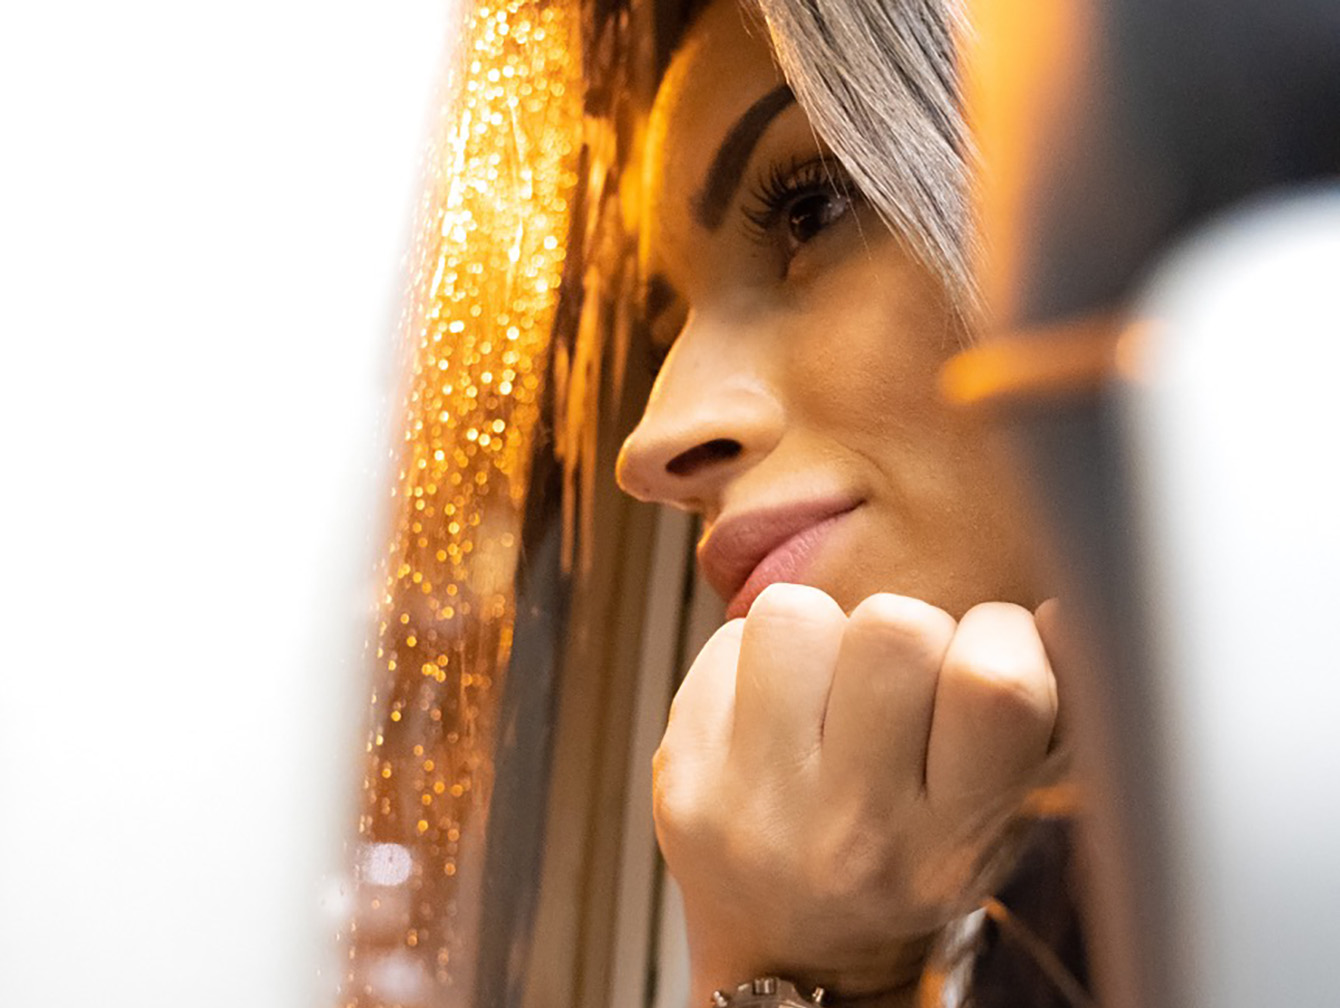 A contemplative woman gazing out a window with raindrops